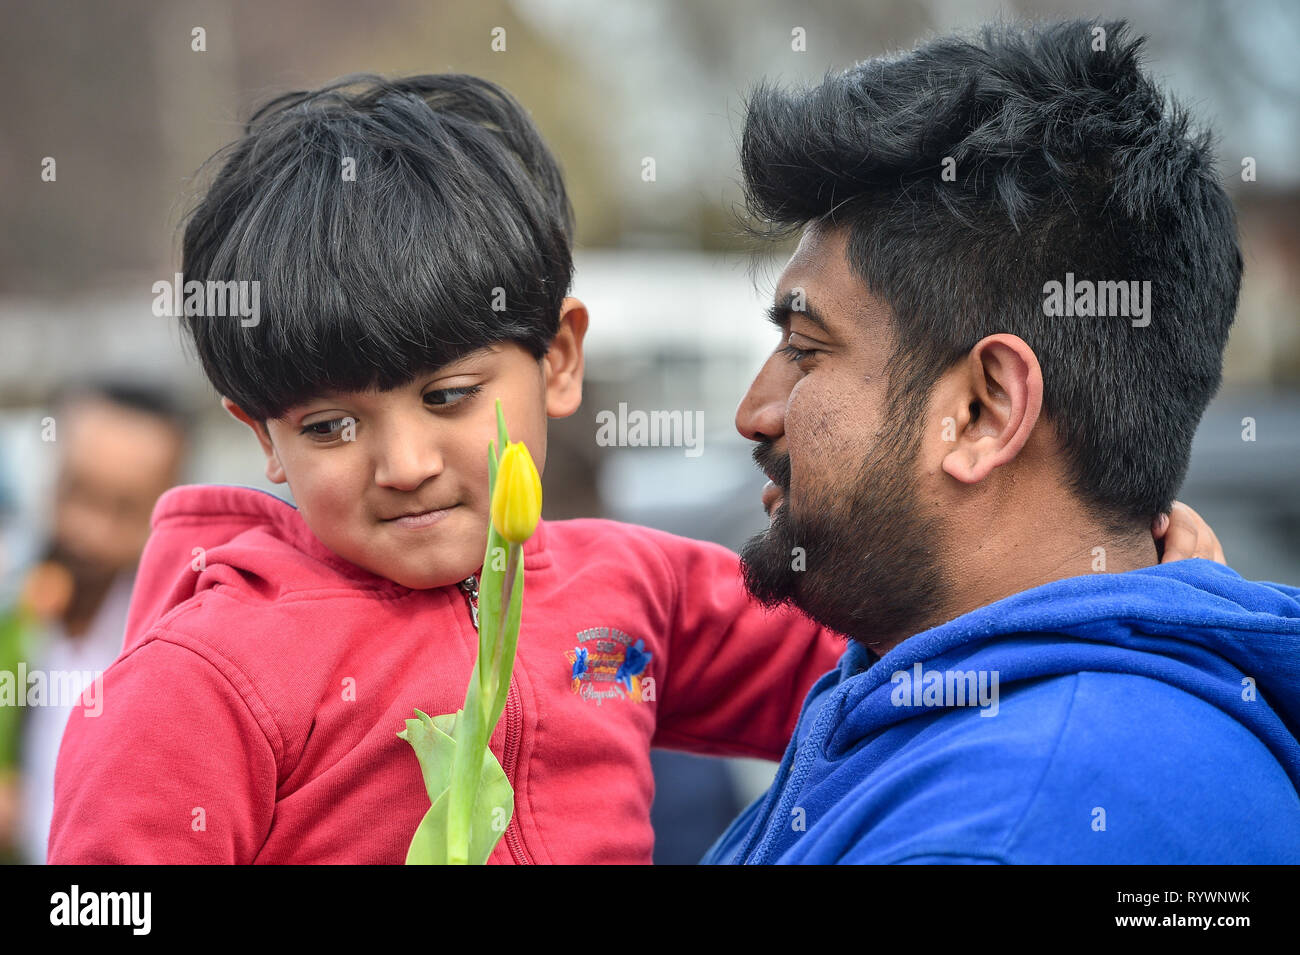 Aahil Ashraf, four, from Birmingham, with his dad Mohamed Ashraf, holds a yellow flower given to him by Christian James Lynch, from Riverside Church, who is handing out flowers to Muslims as they leave Birmingham Central Mosque after the attack on the Mosque in Christchurch, New Zealand. Stock Photo